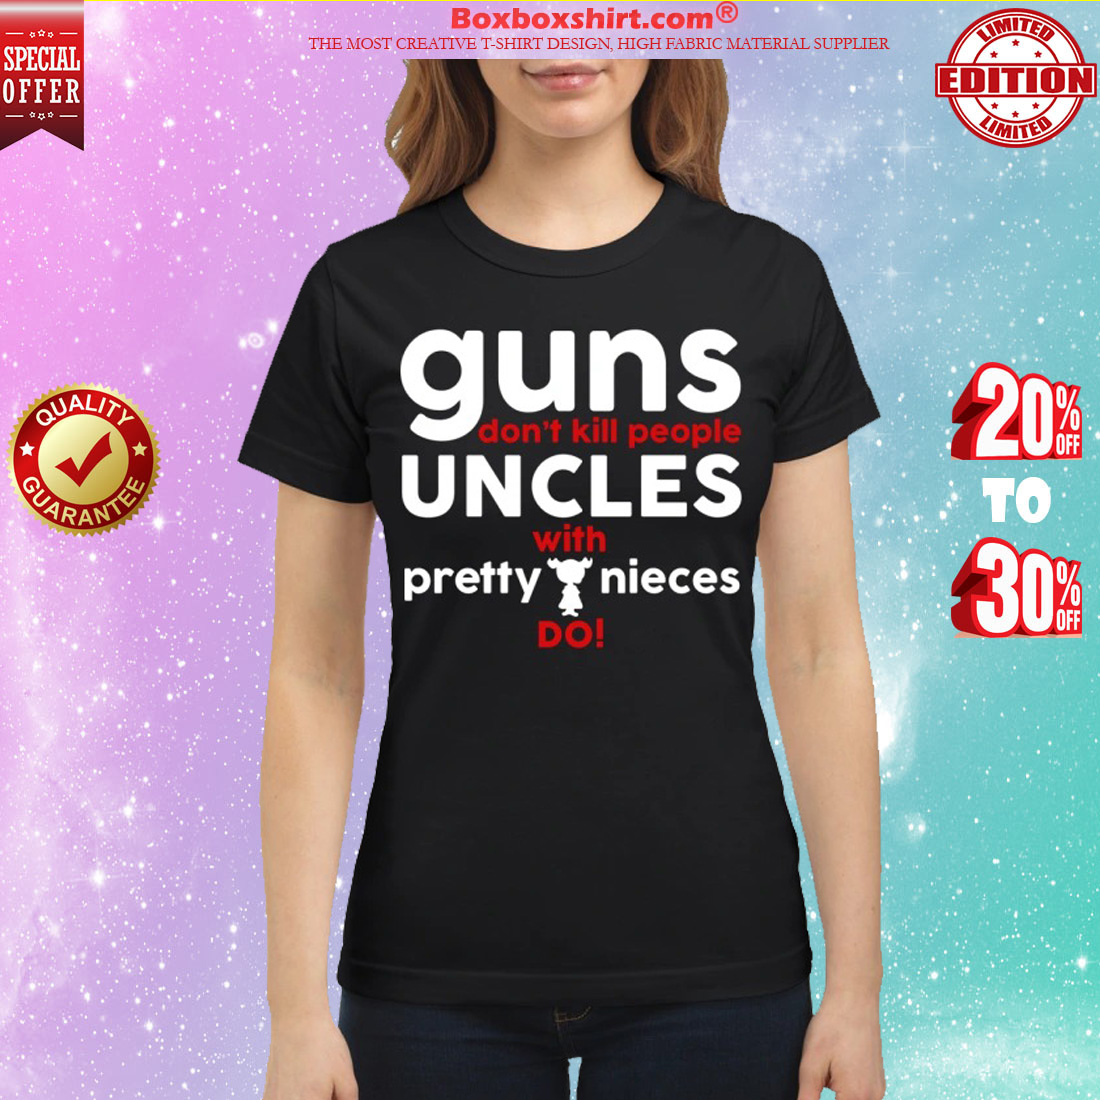 Guns don't kill people uncles with pretty nieces do classic shirt